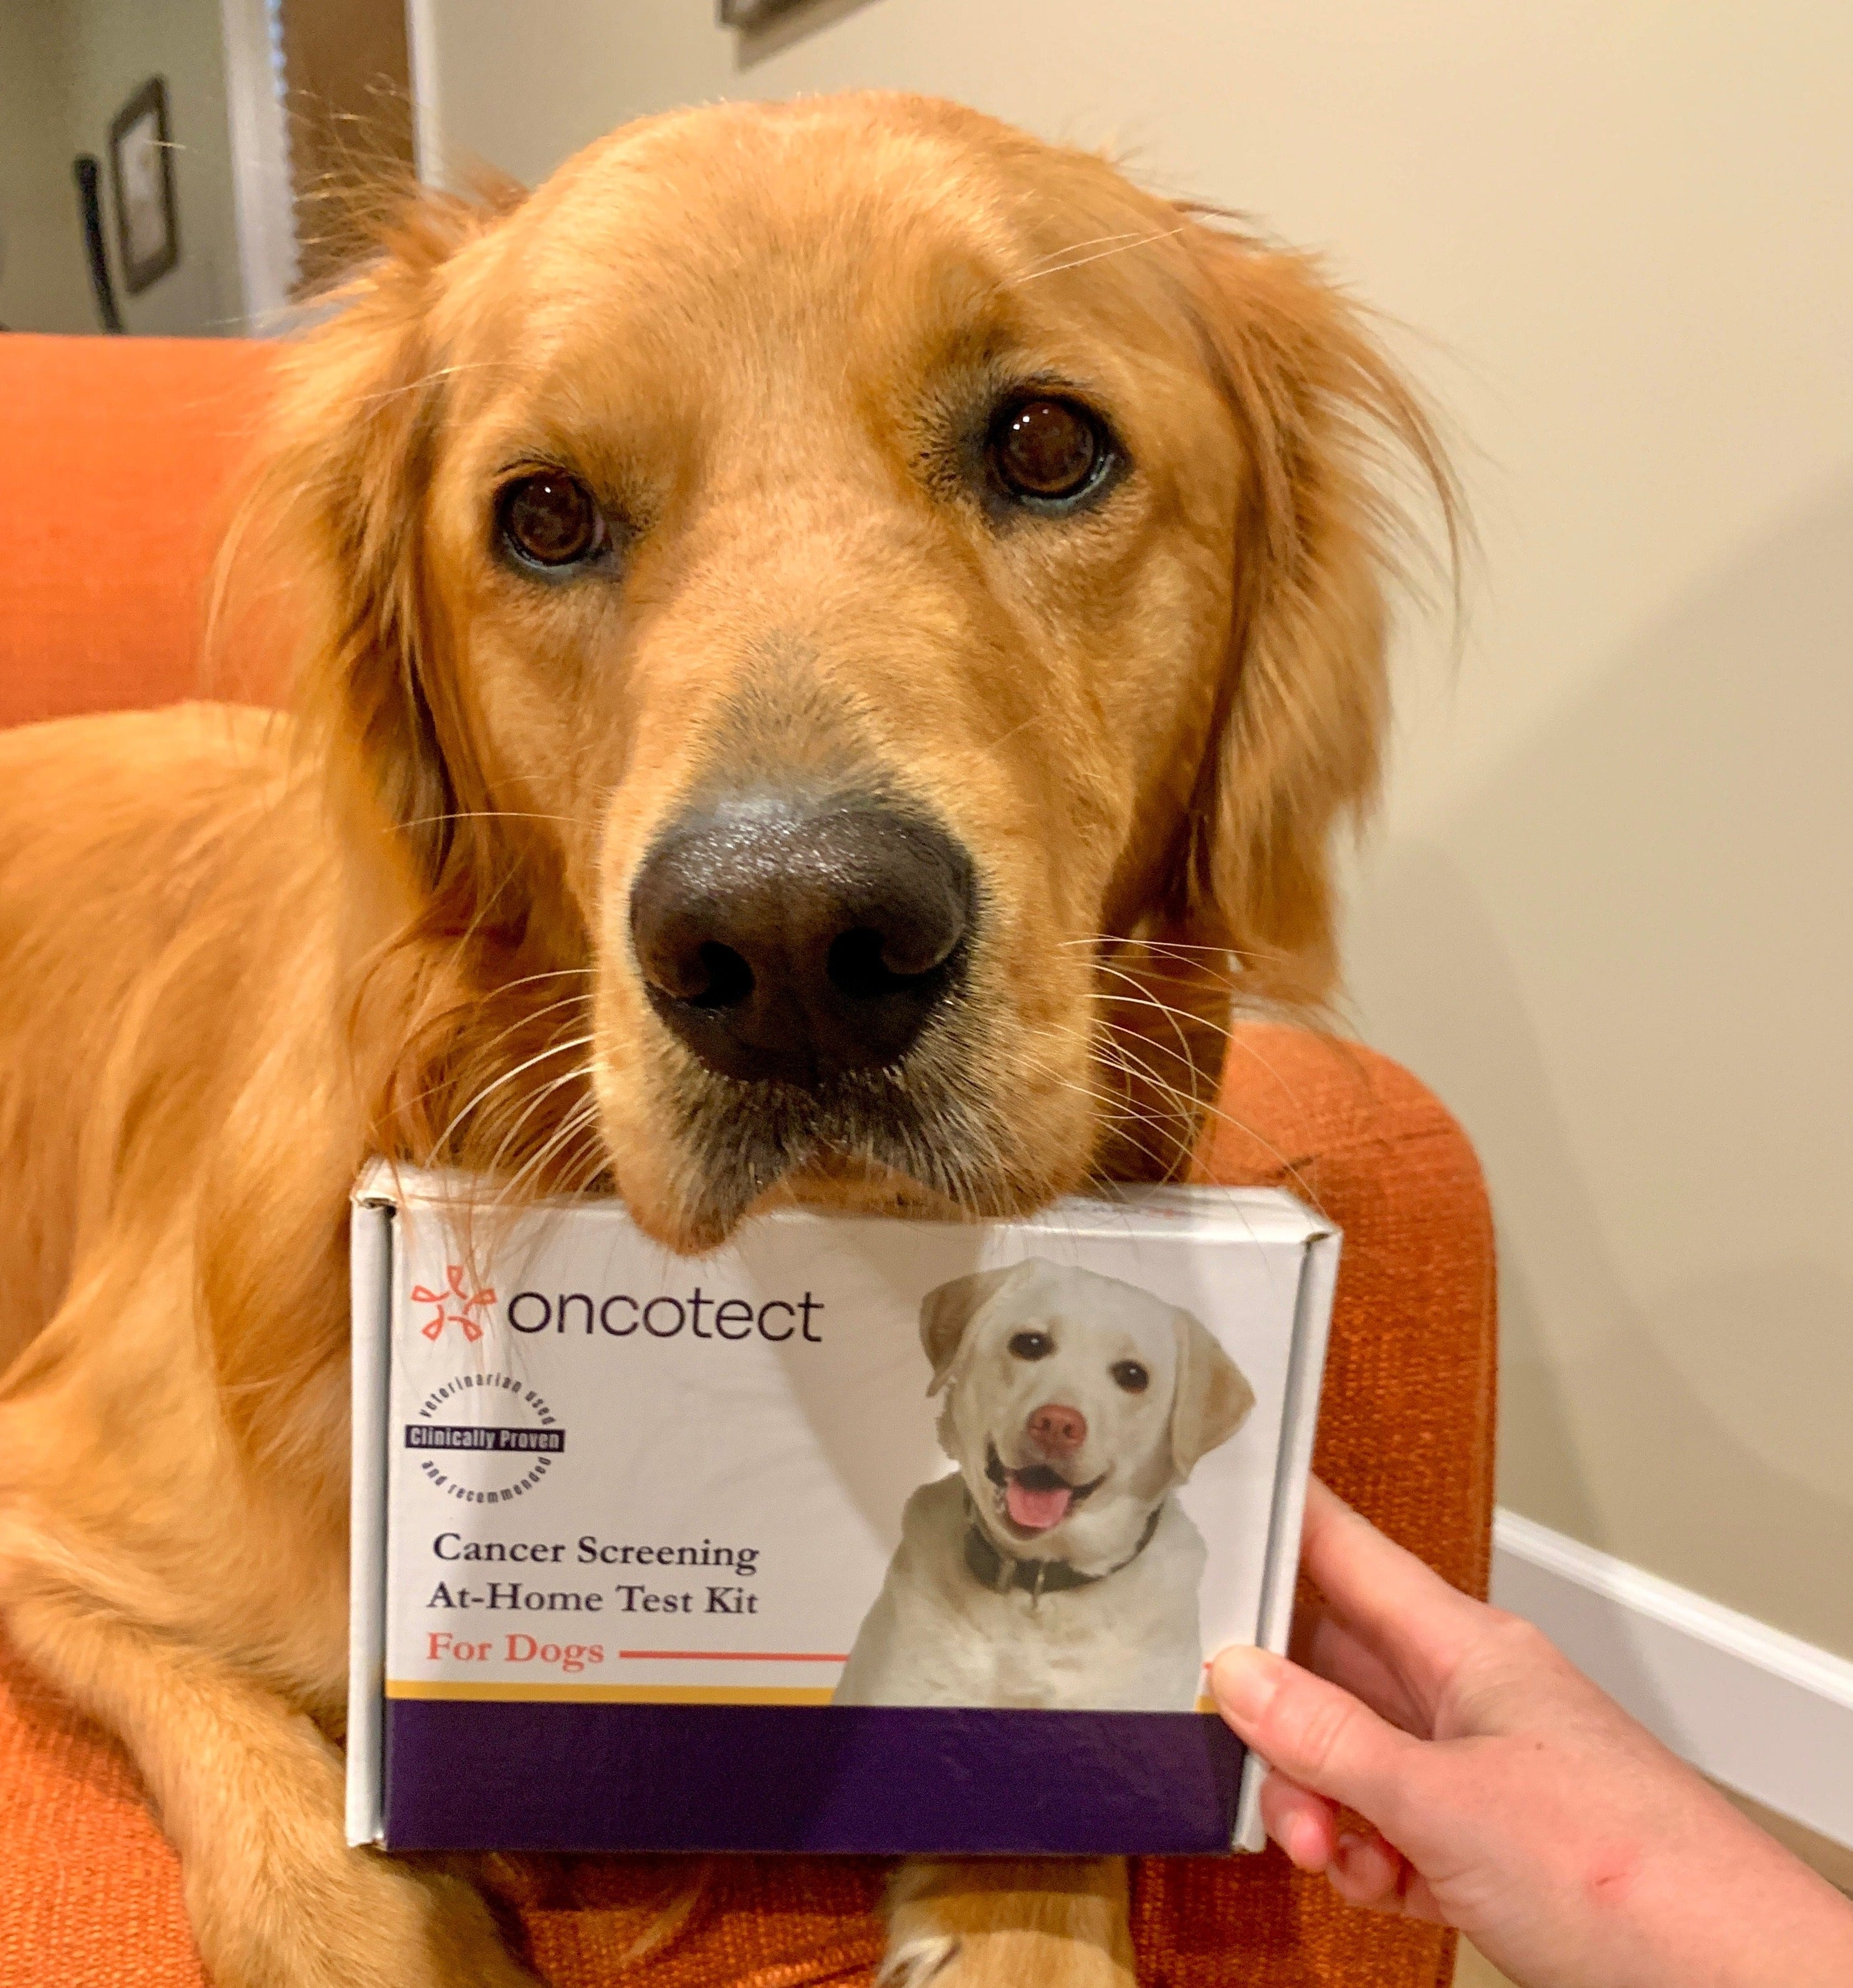 The World's First and Only At-Home Cancer Screening Test Kit for Dogs